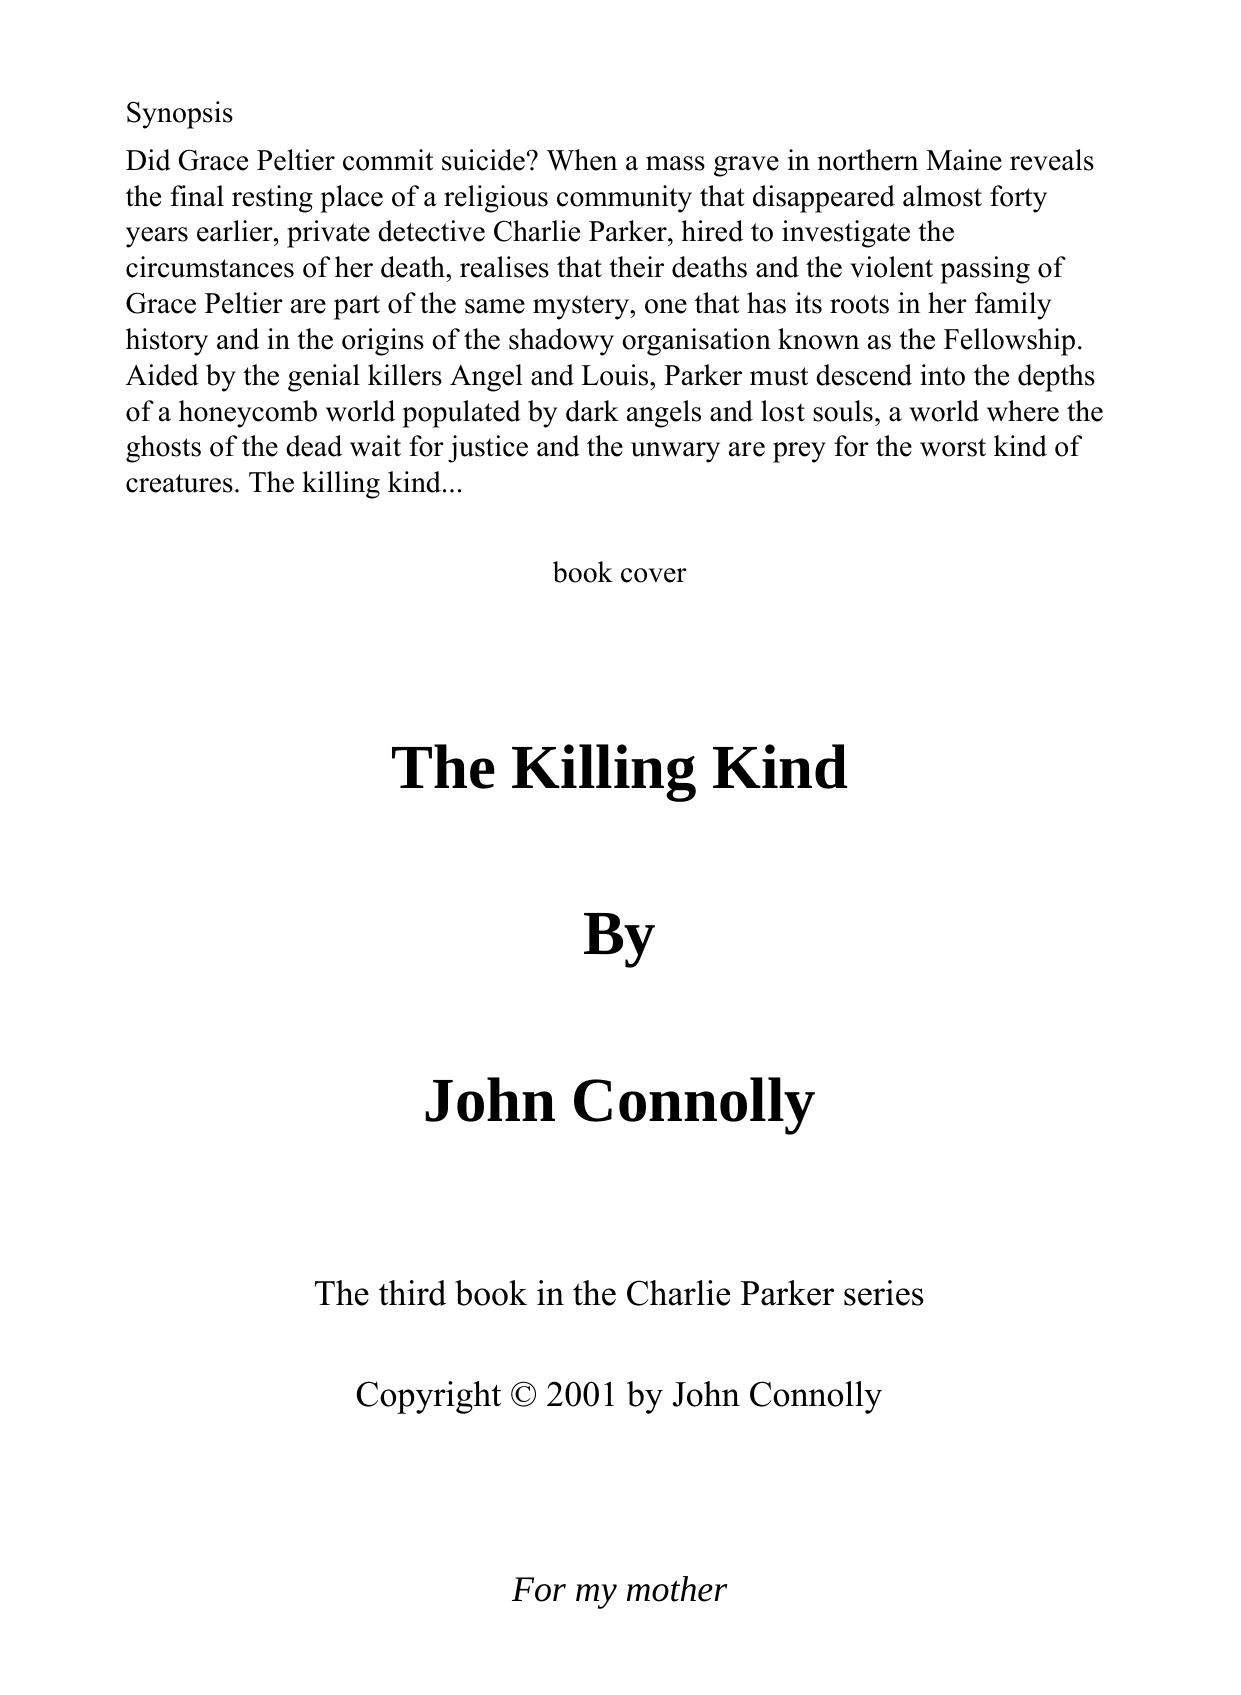 The Killing Kind by John Connolly